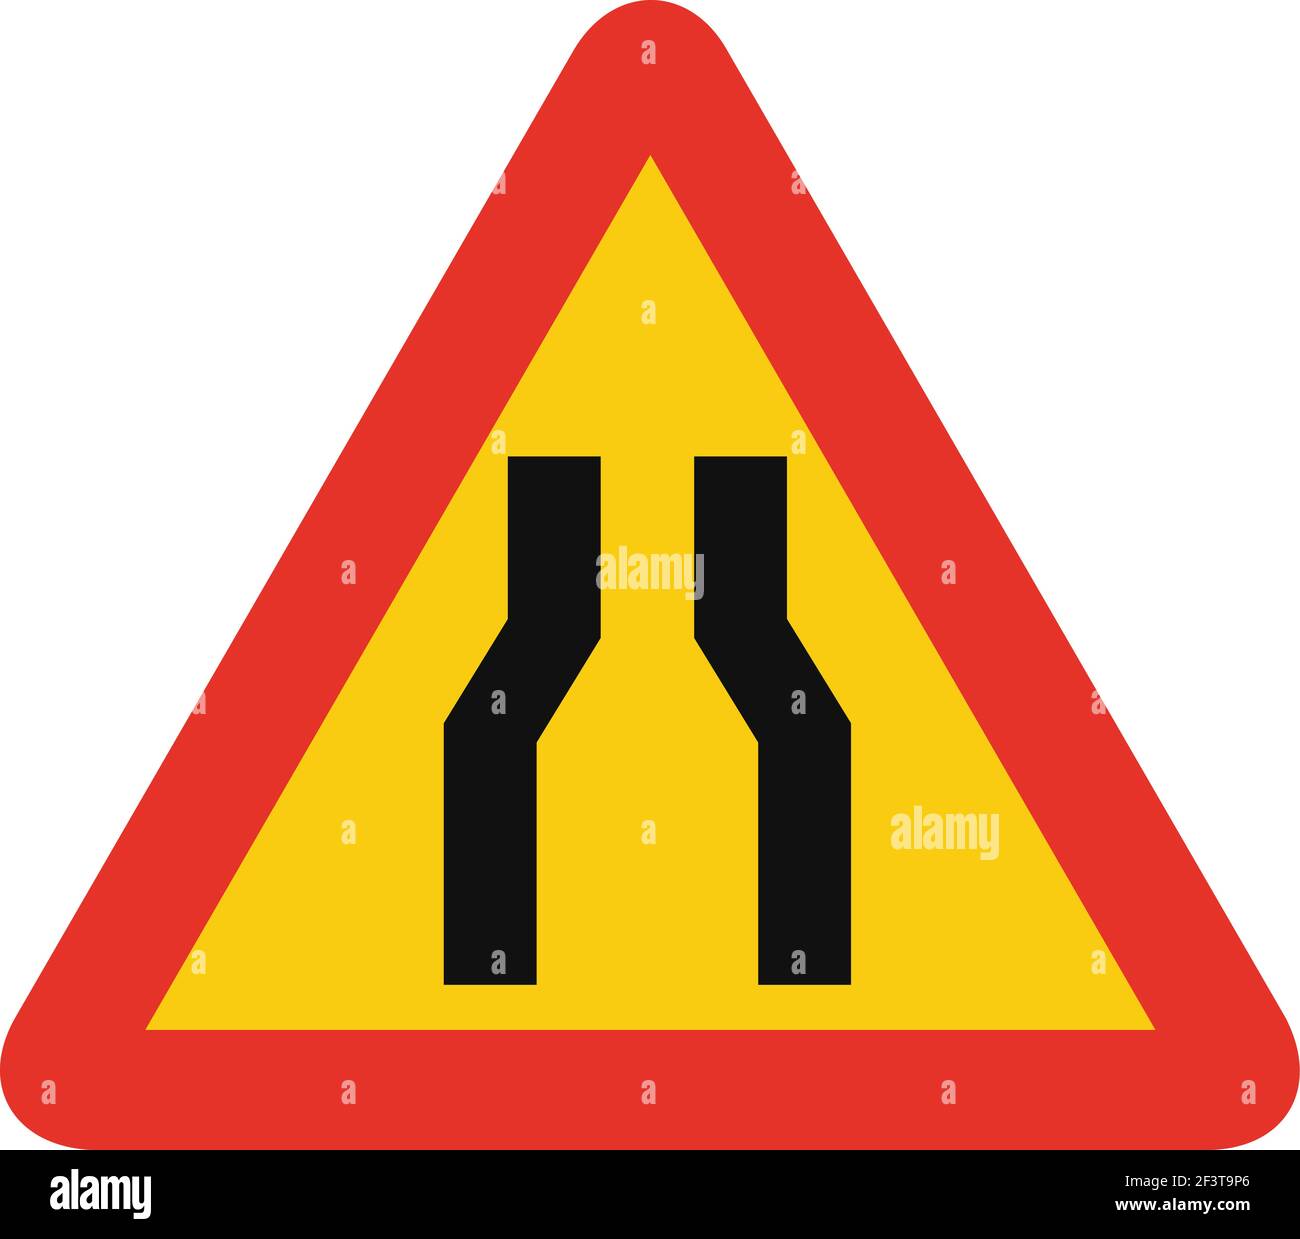 Triangular traffic signal in yellow and red, isolated on white background. Temporary warning of narrow road ahead Stock Vector